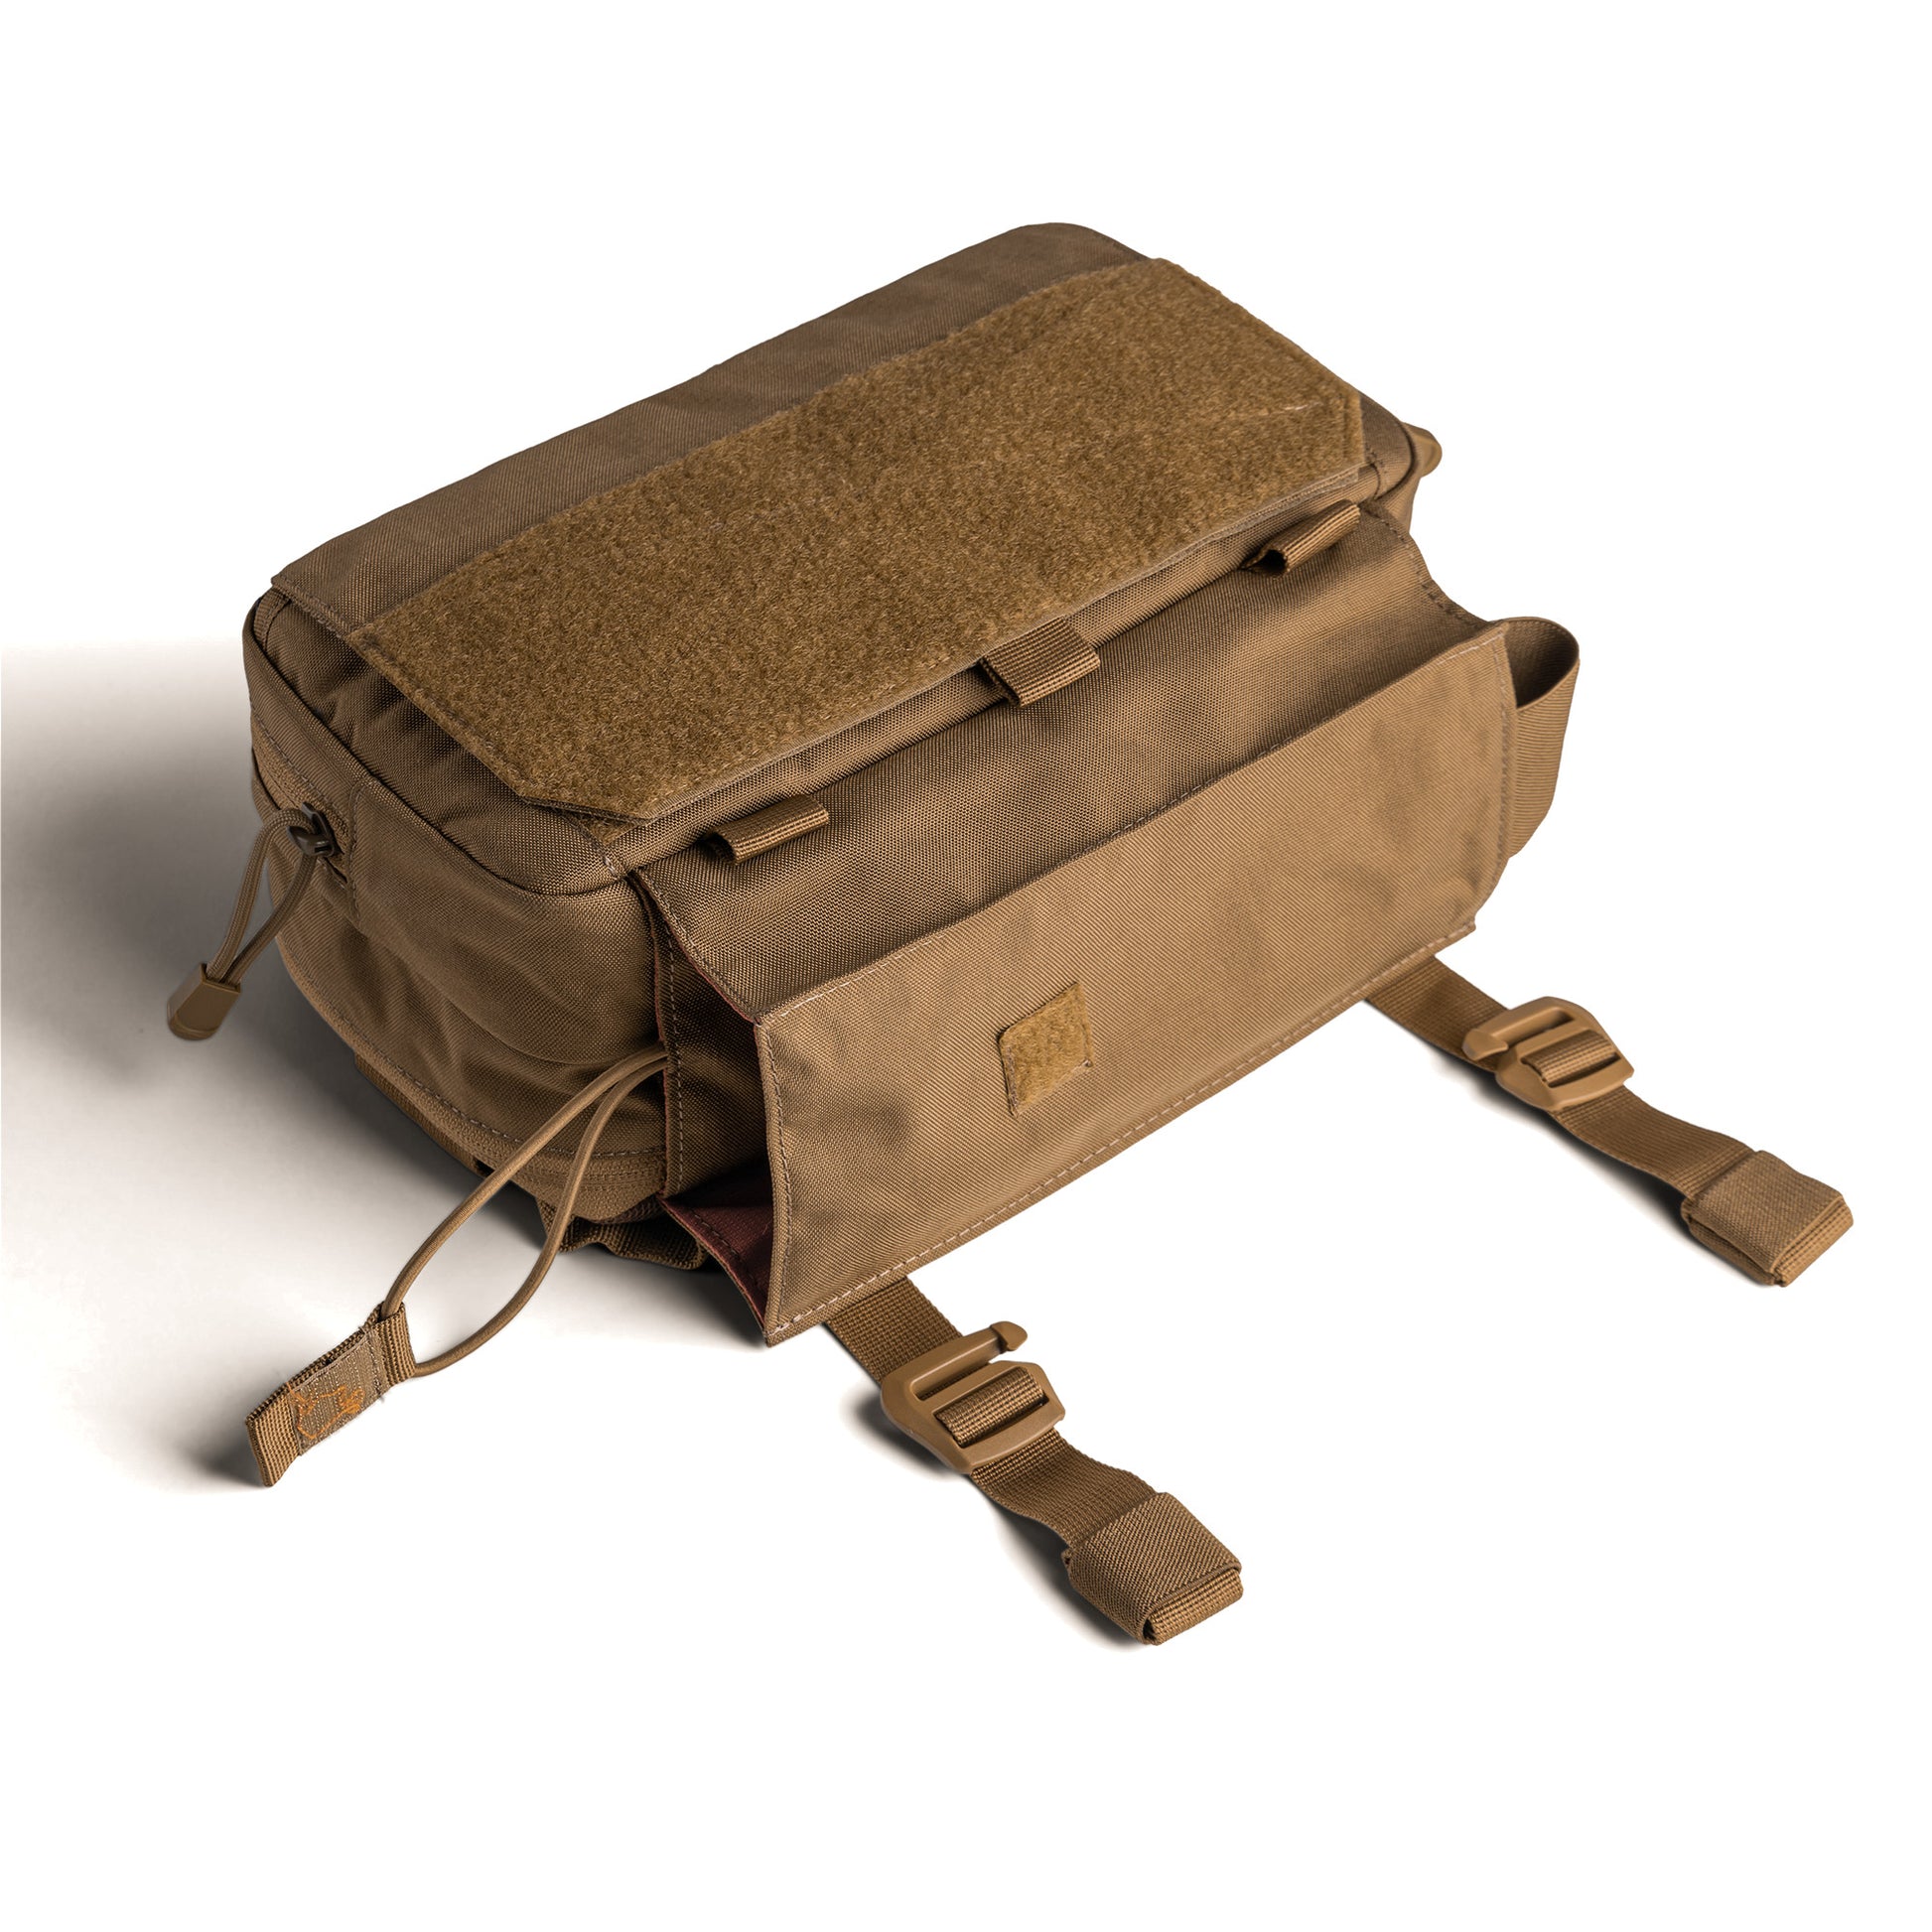 CT5 - EDC SLING PACK – Ctactical